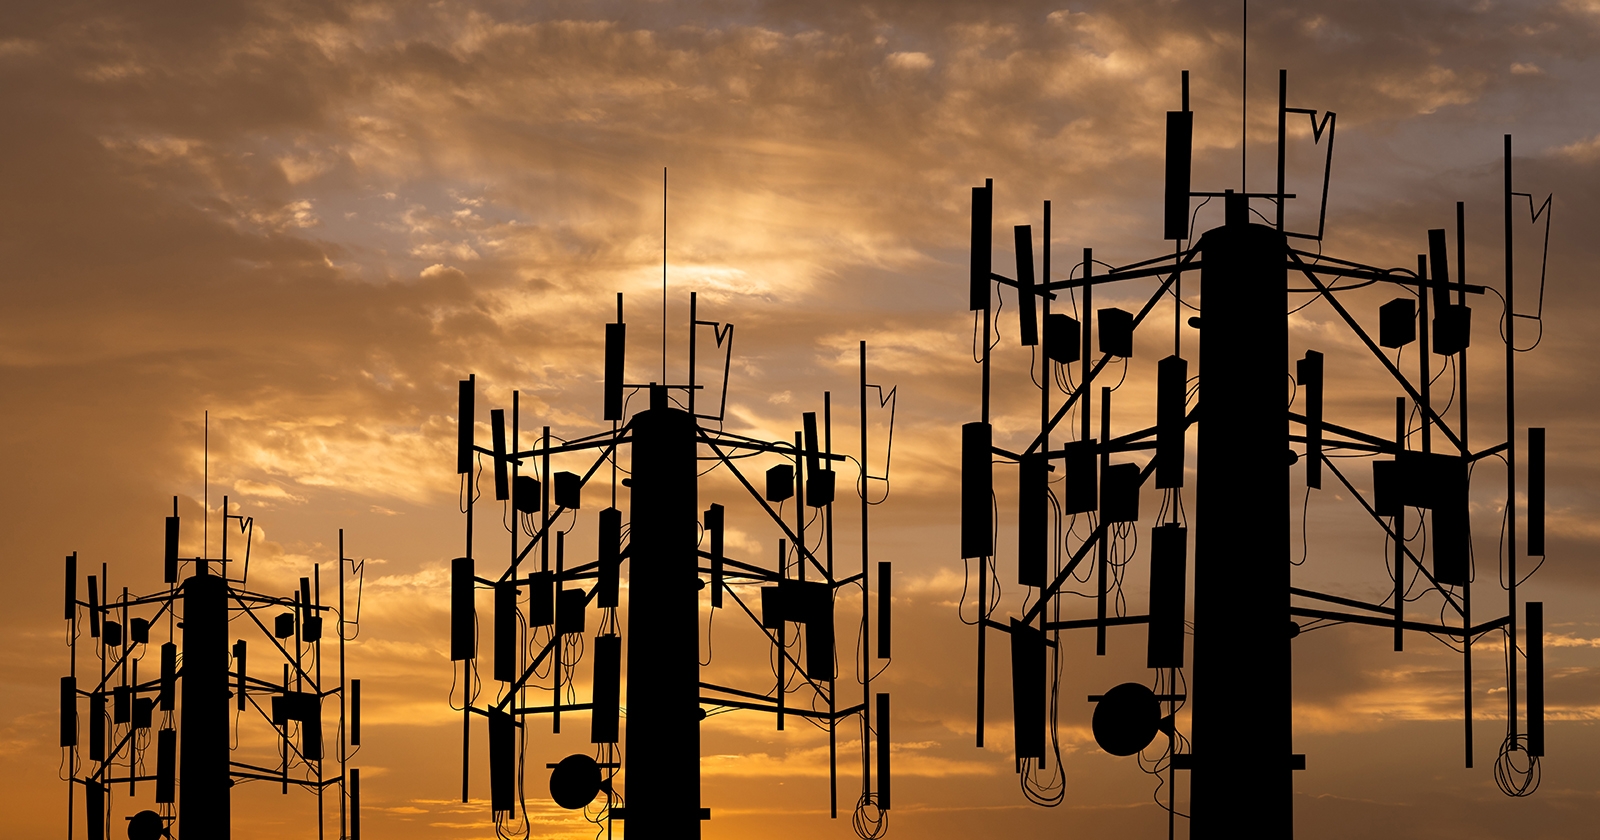 Three tall communication towers. Exponent engineers provide technical expertise for all wireless communications.